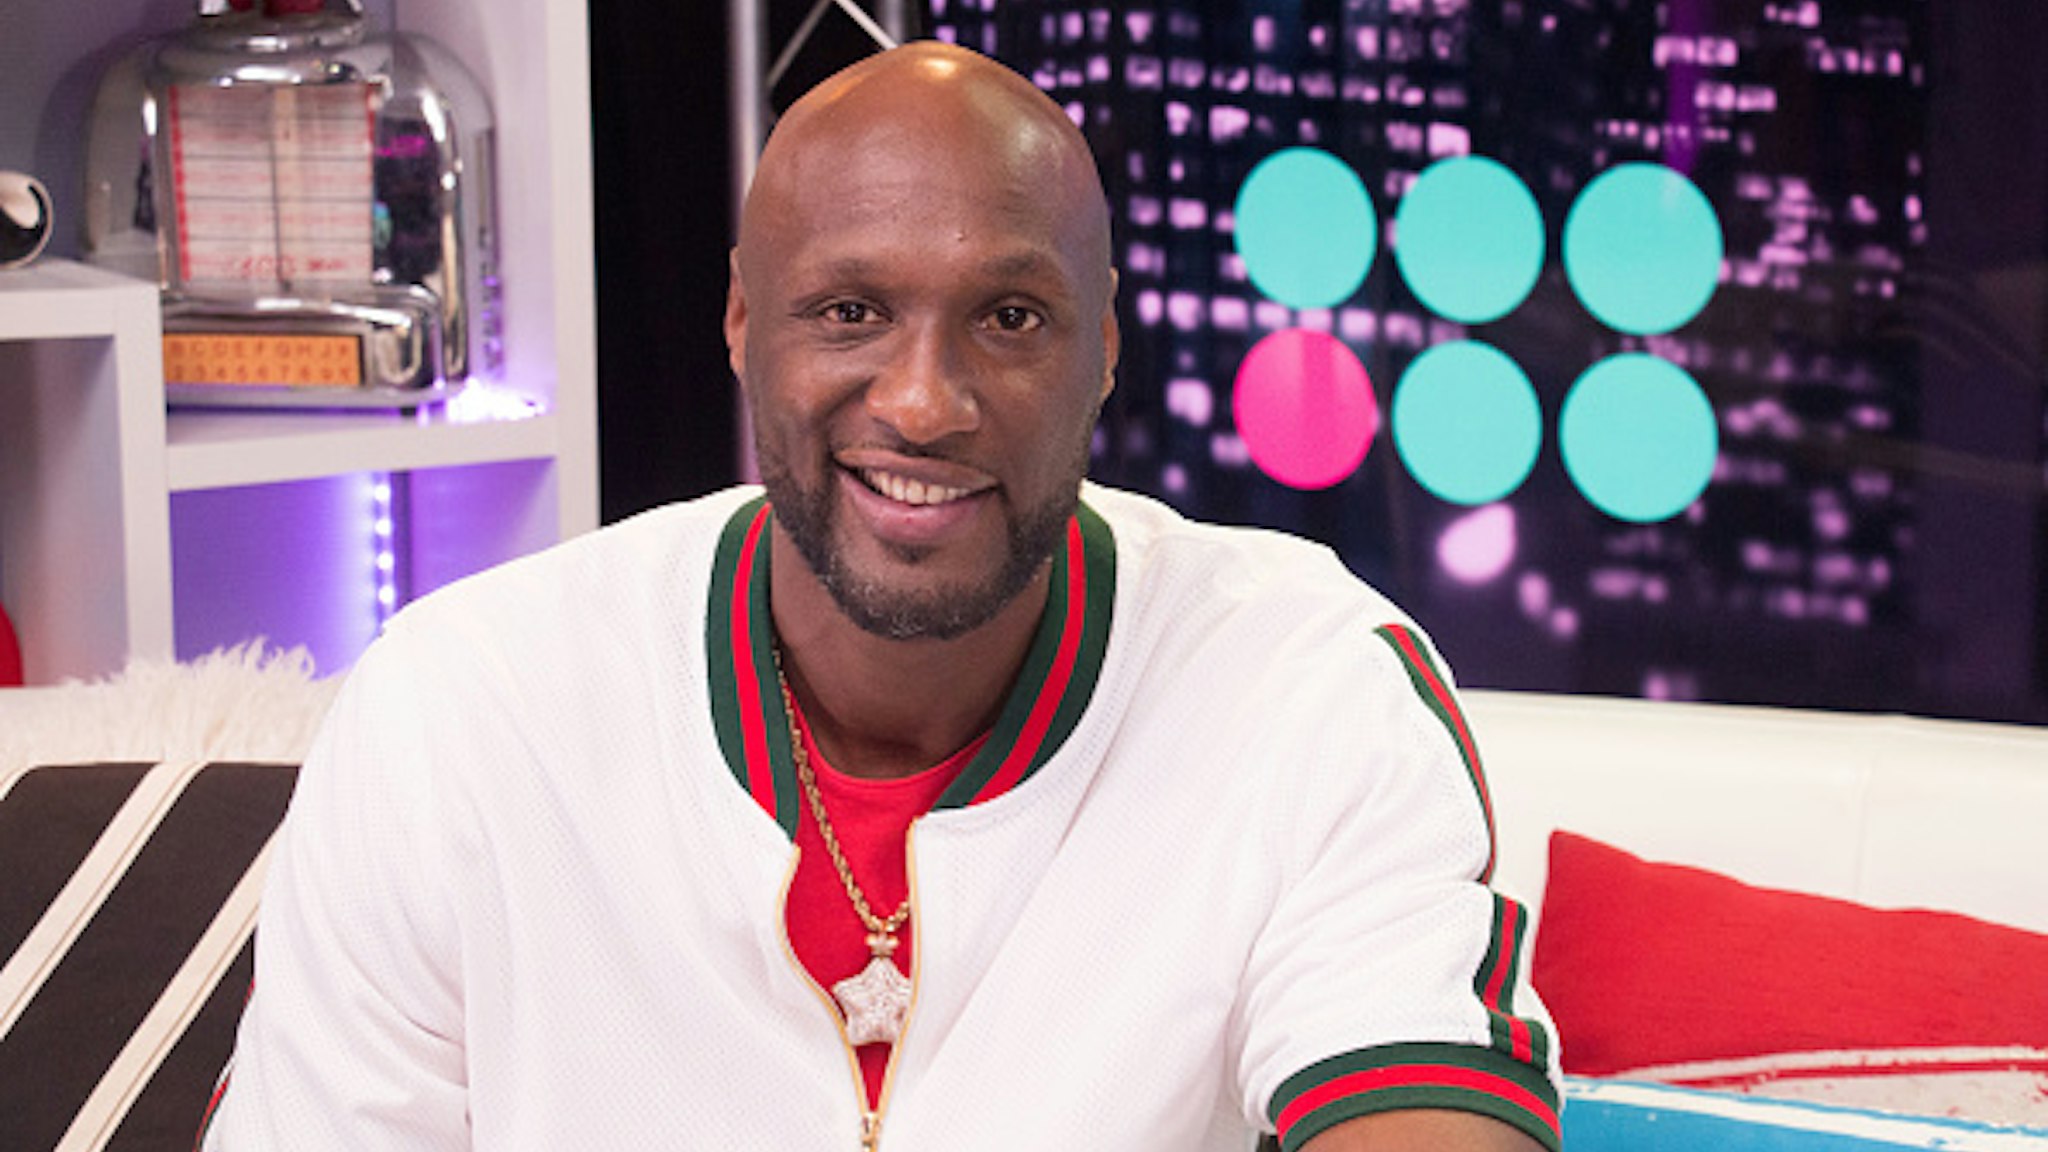 LOS ANGELES, CALIFORNIA - SEPTEMBER 11: (EXCLUSIVE COVERAGE) Lamar Odom visits the Young Hollywood Studio on September 11, 2019 in Los Angeles, California.